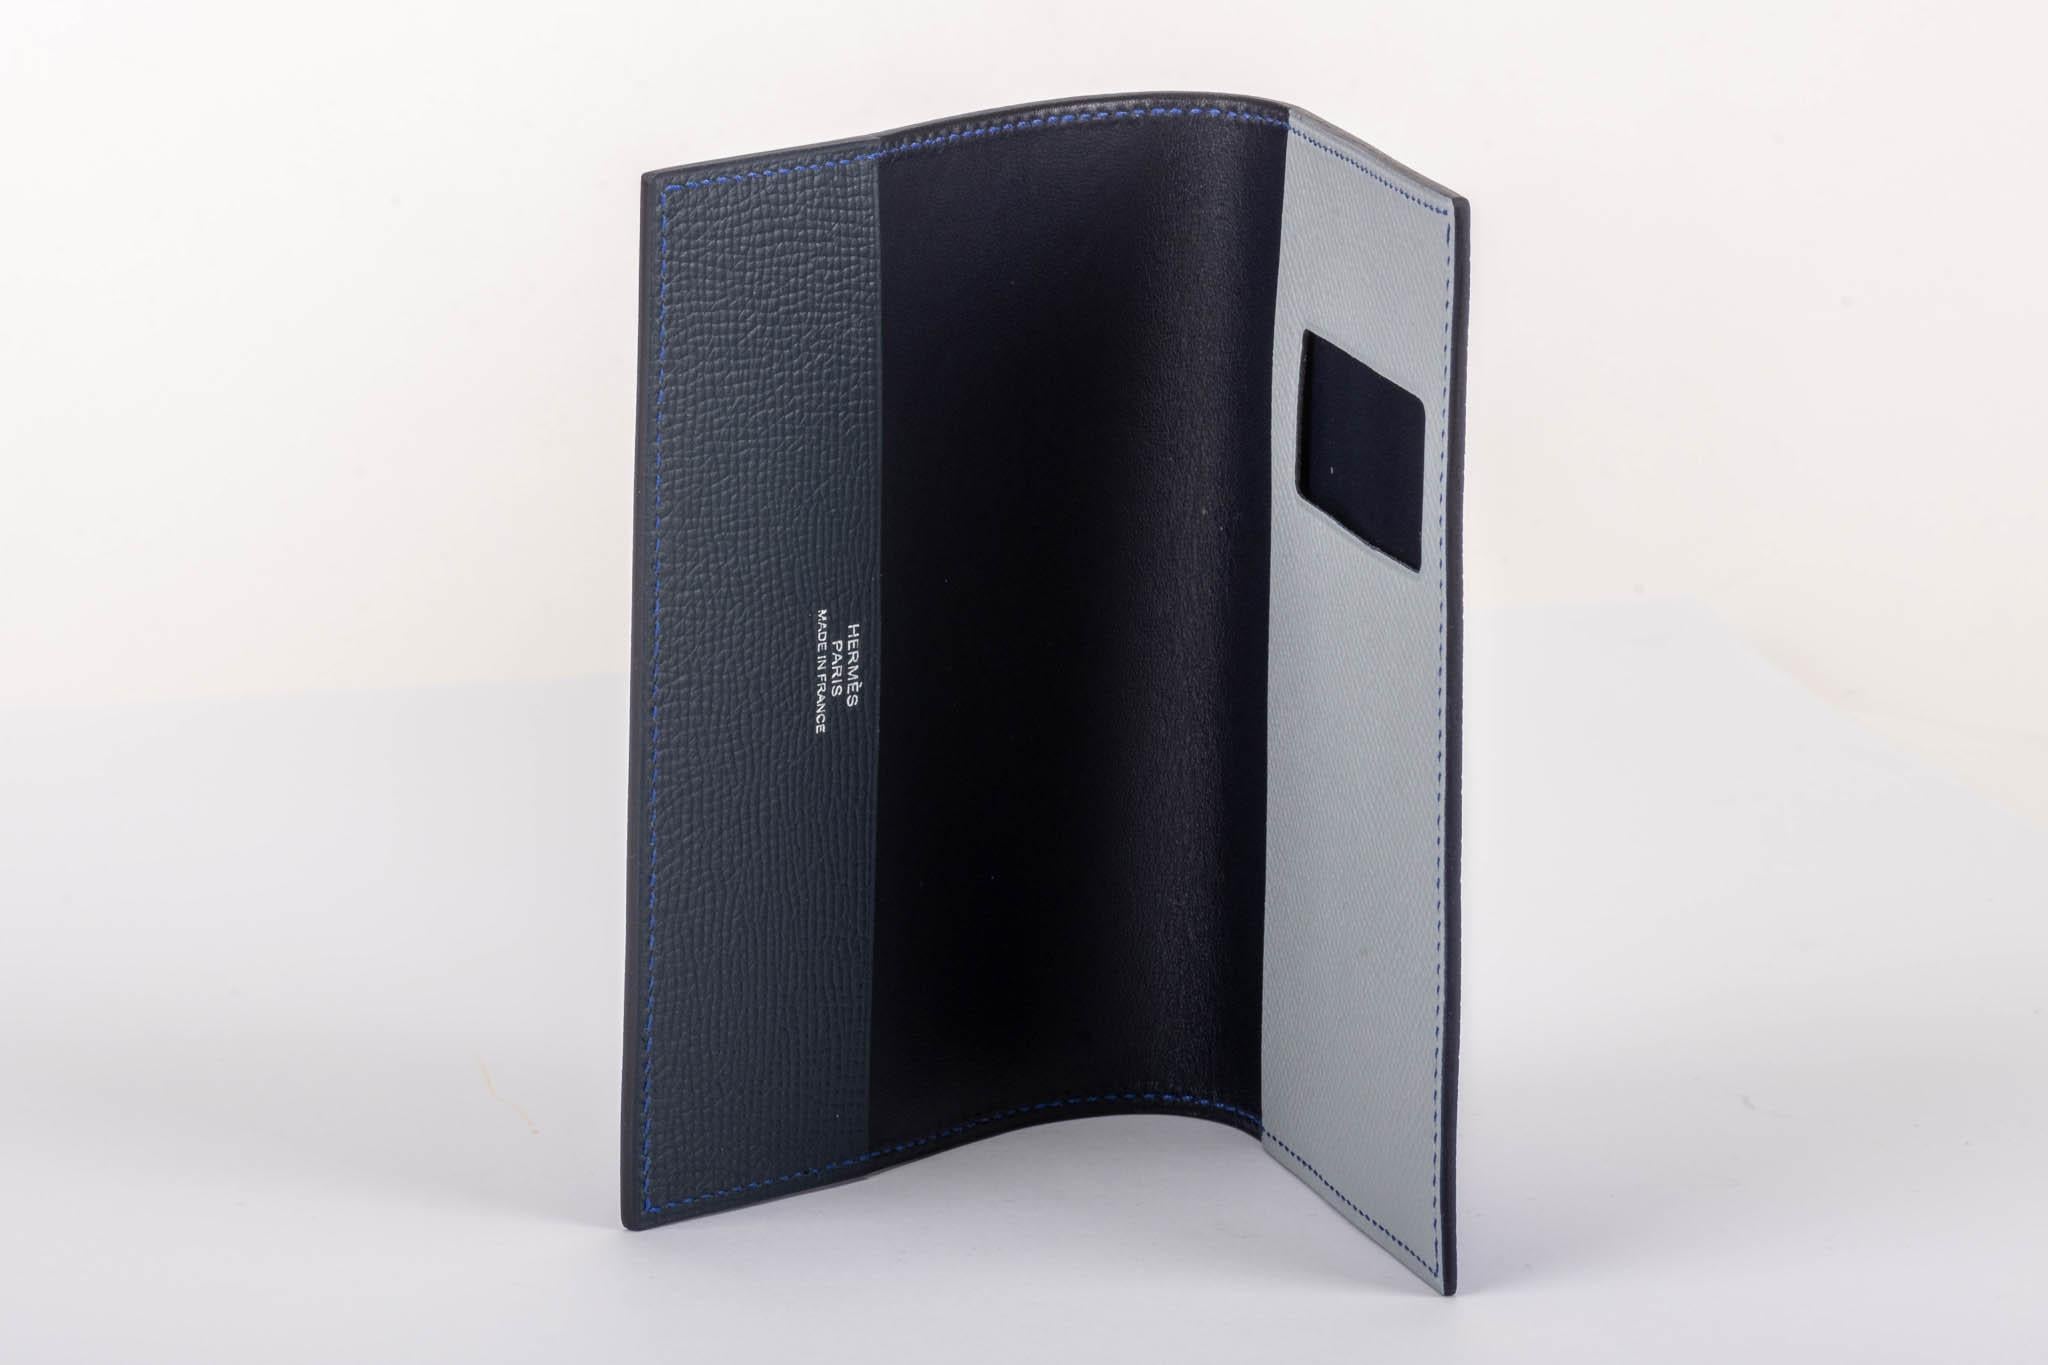 Hermes brand new in box black passport holder in epsom leather . Comes with original box and ribbon.